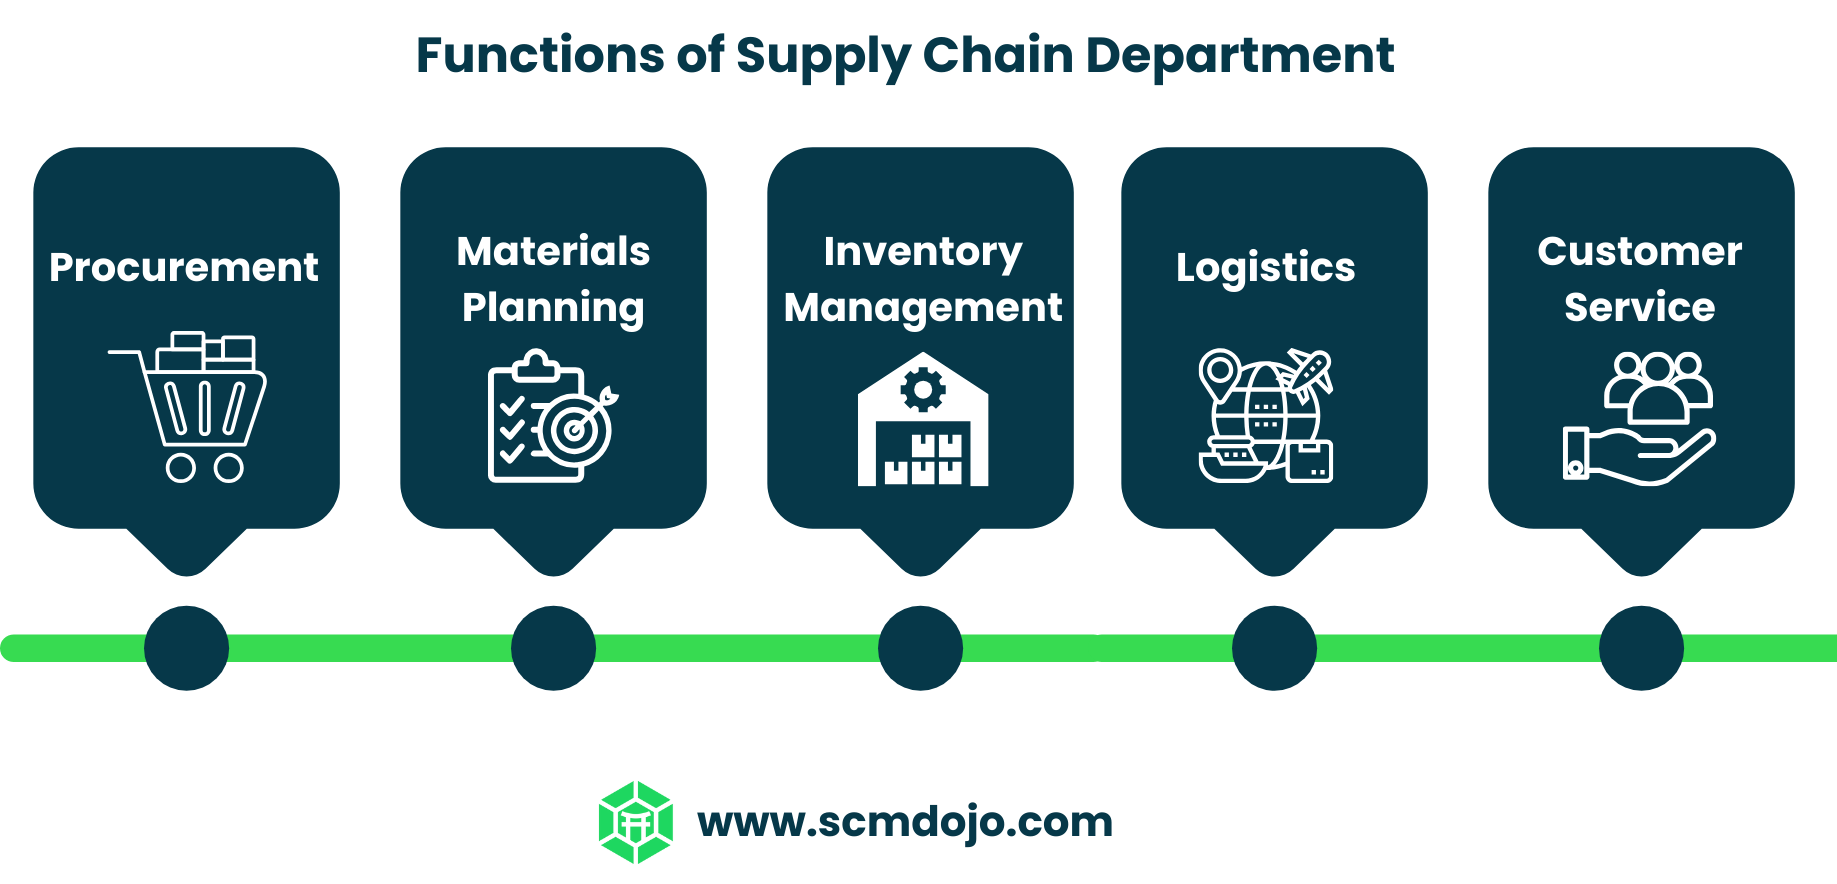 Supply Chain Department structure